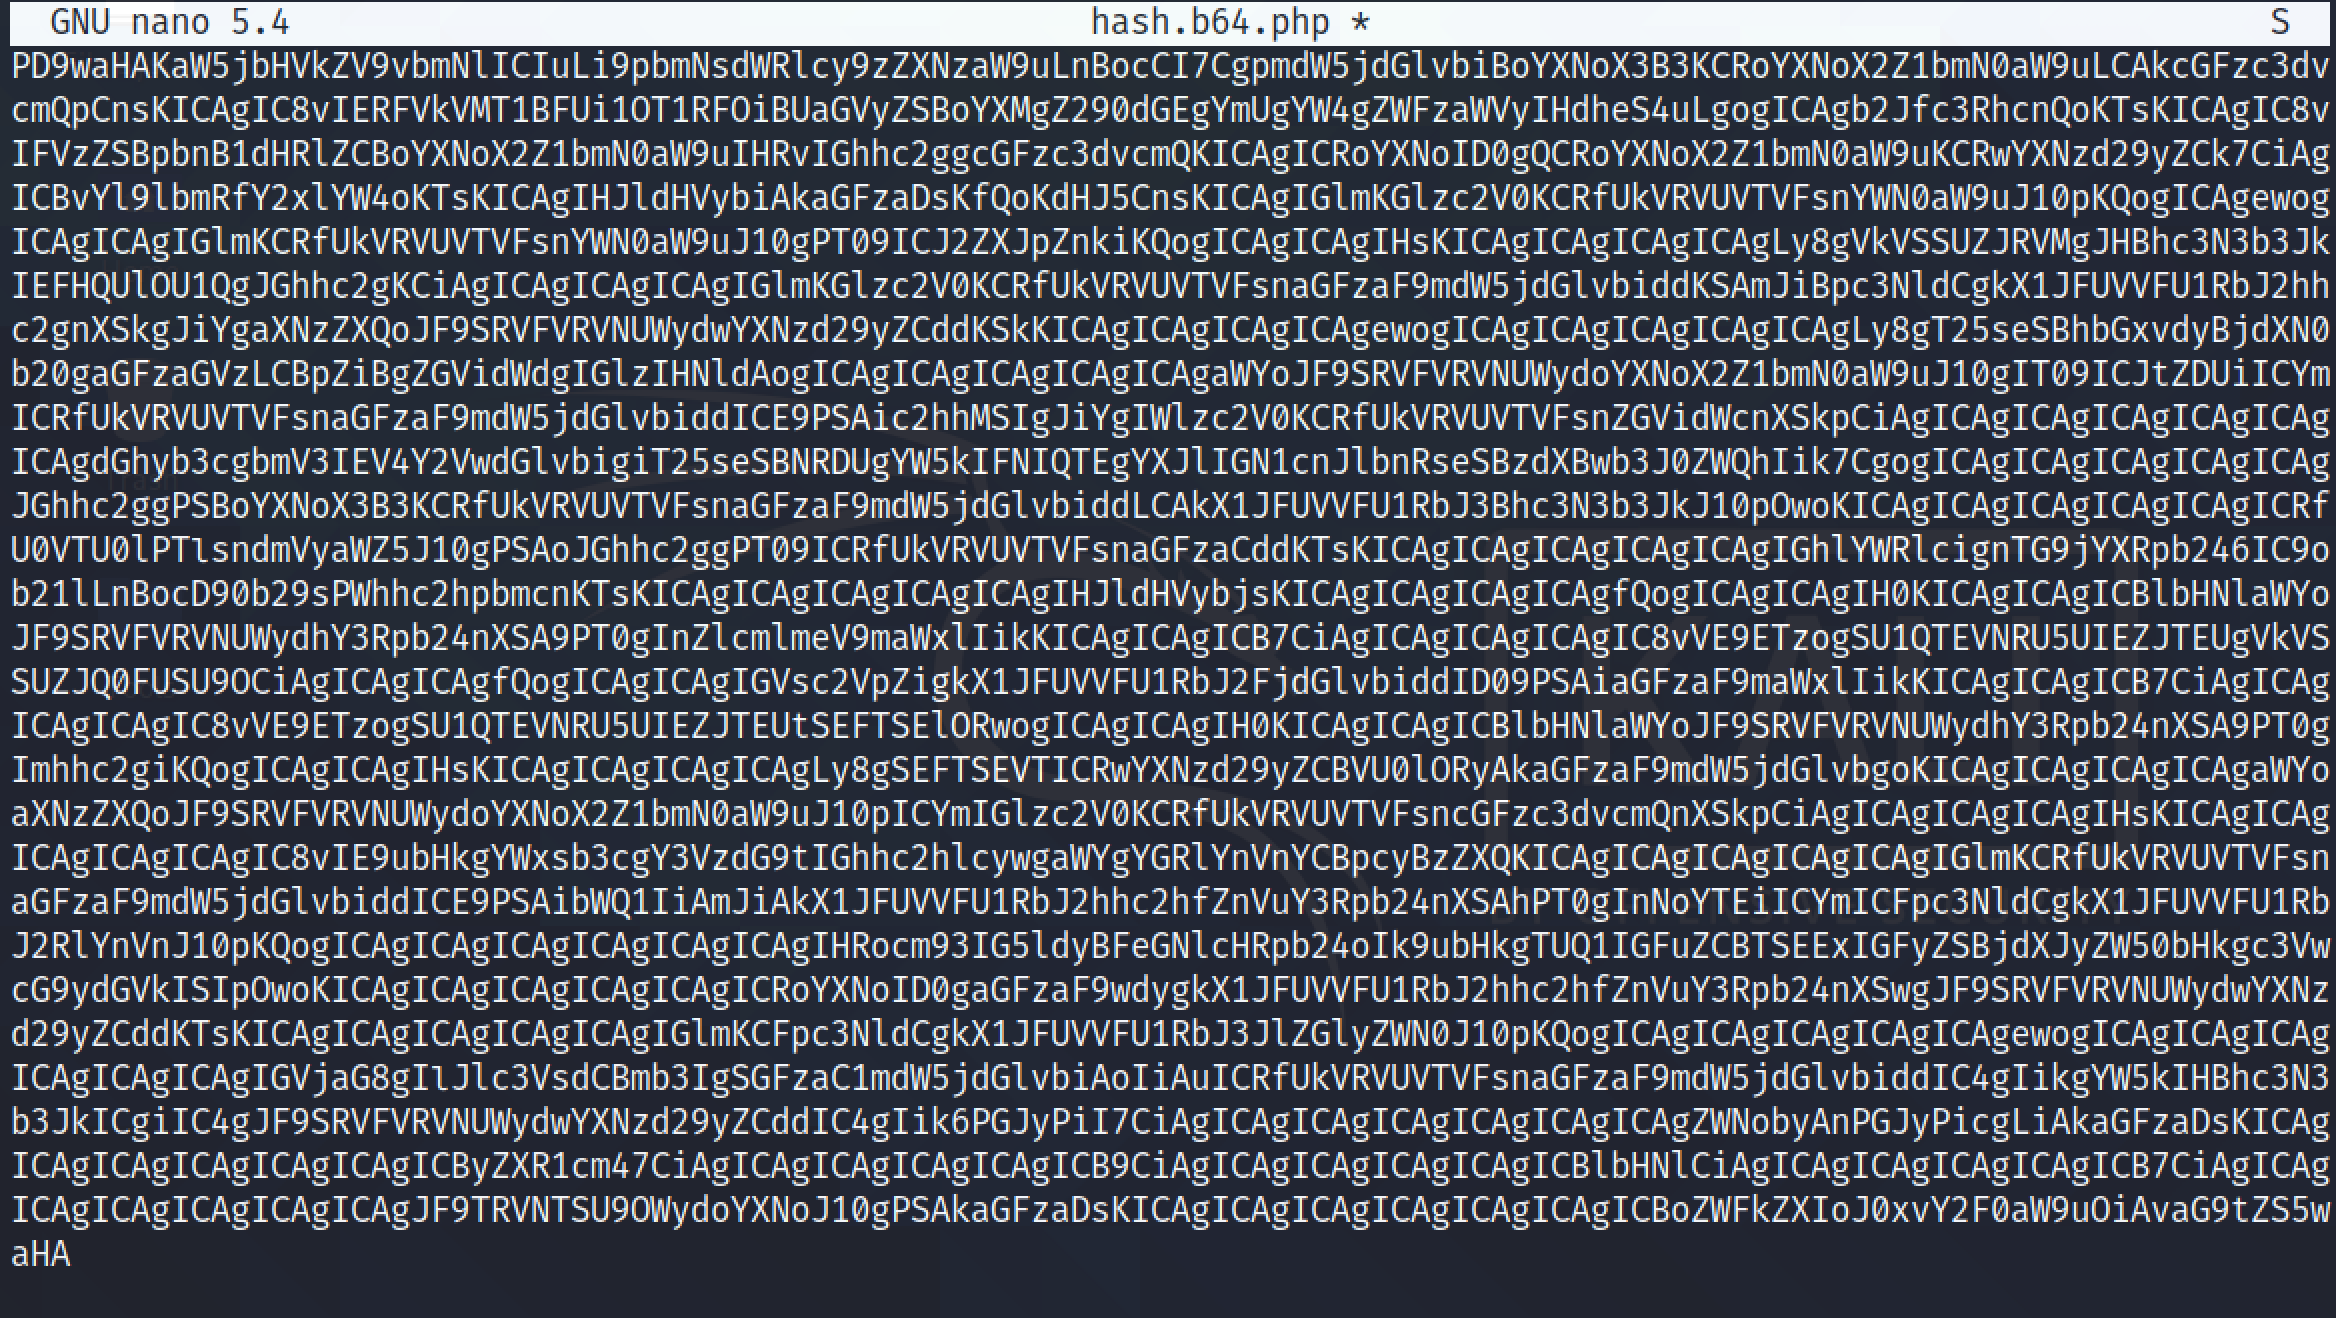 Pasting the Base64 encoded string in a file.